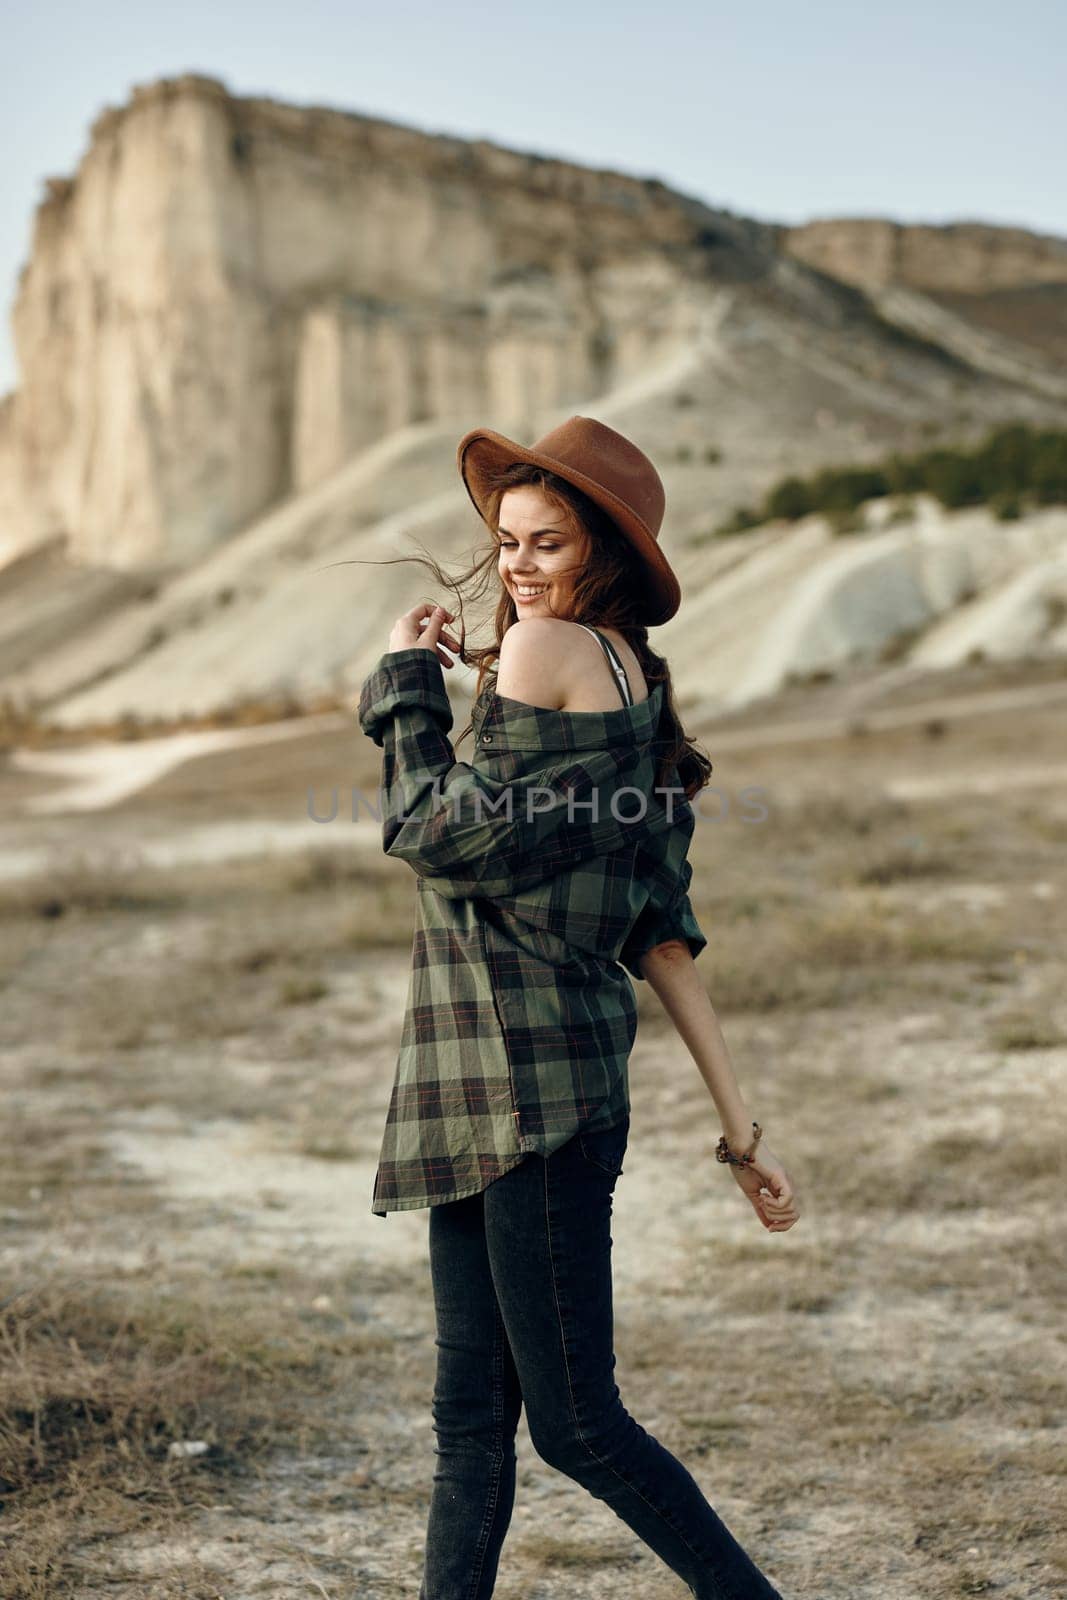 woman in plaid shirt and hat hiking through desert landscape with mountains in background by Vichizh